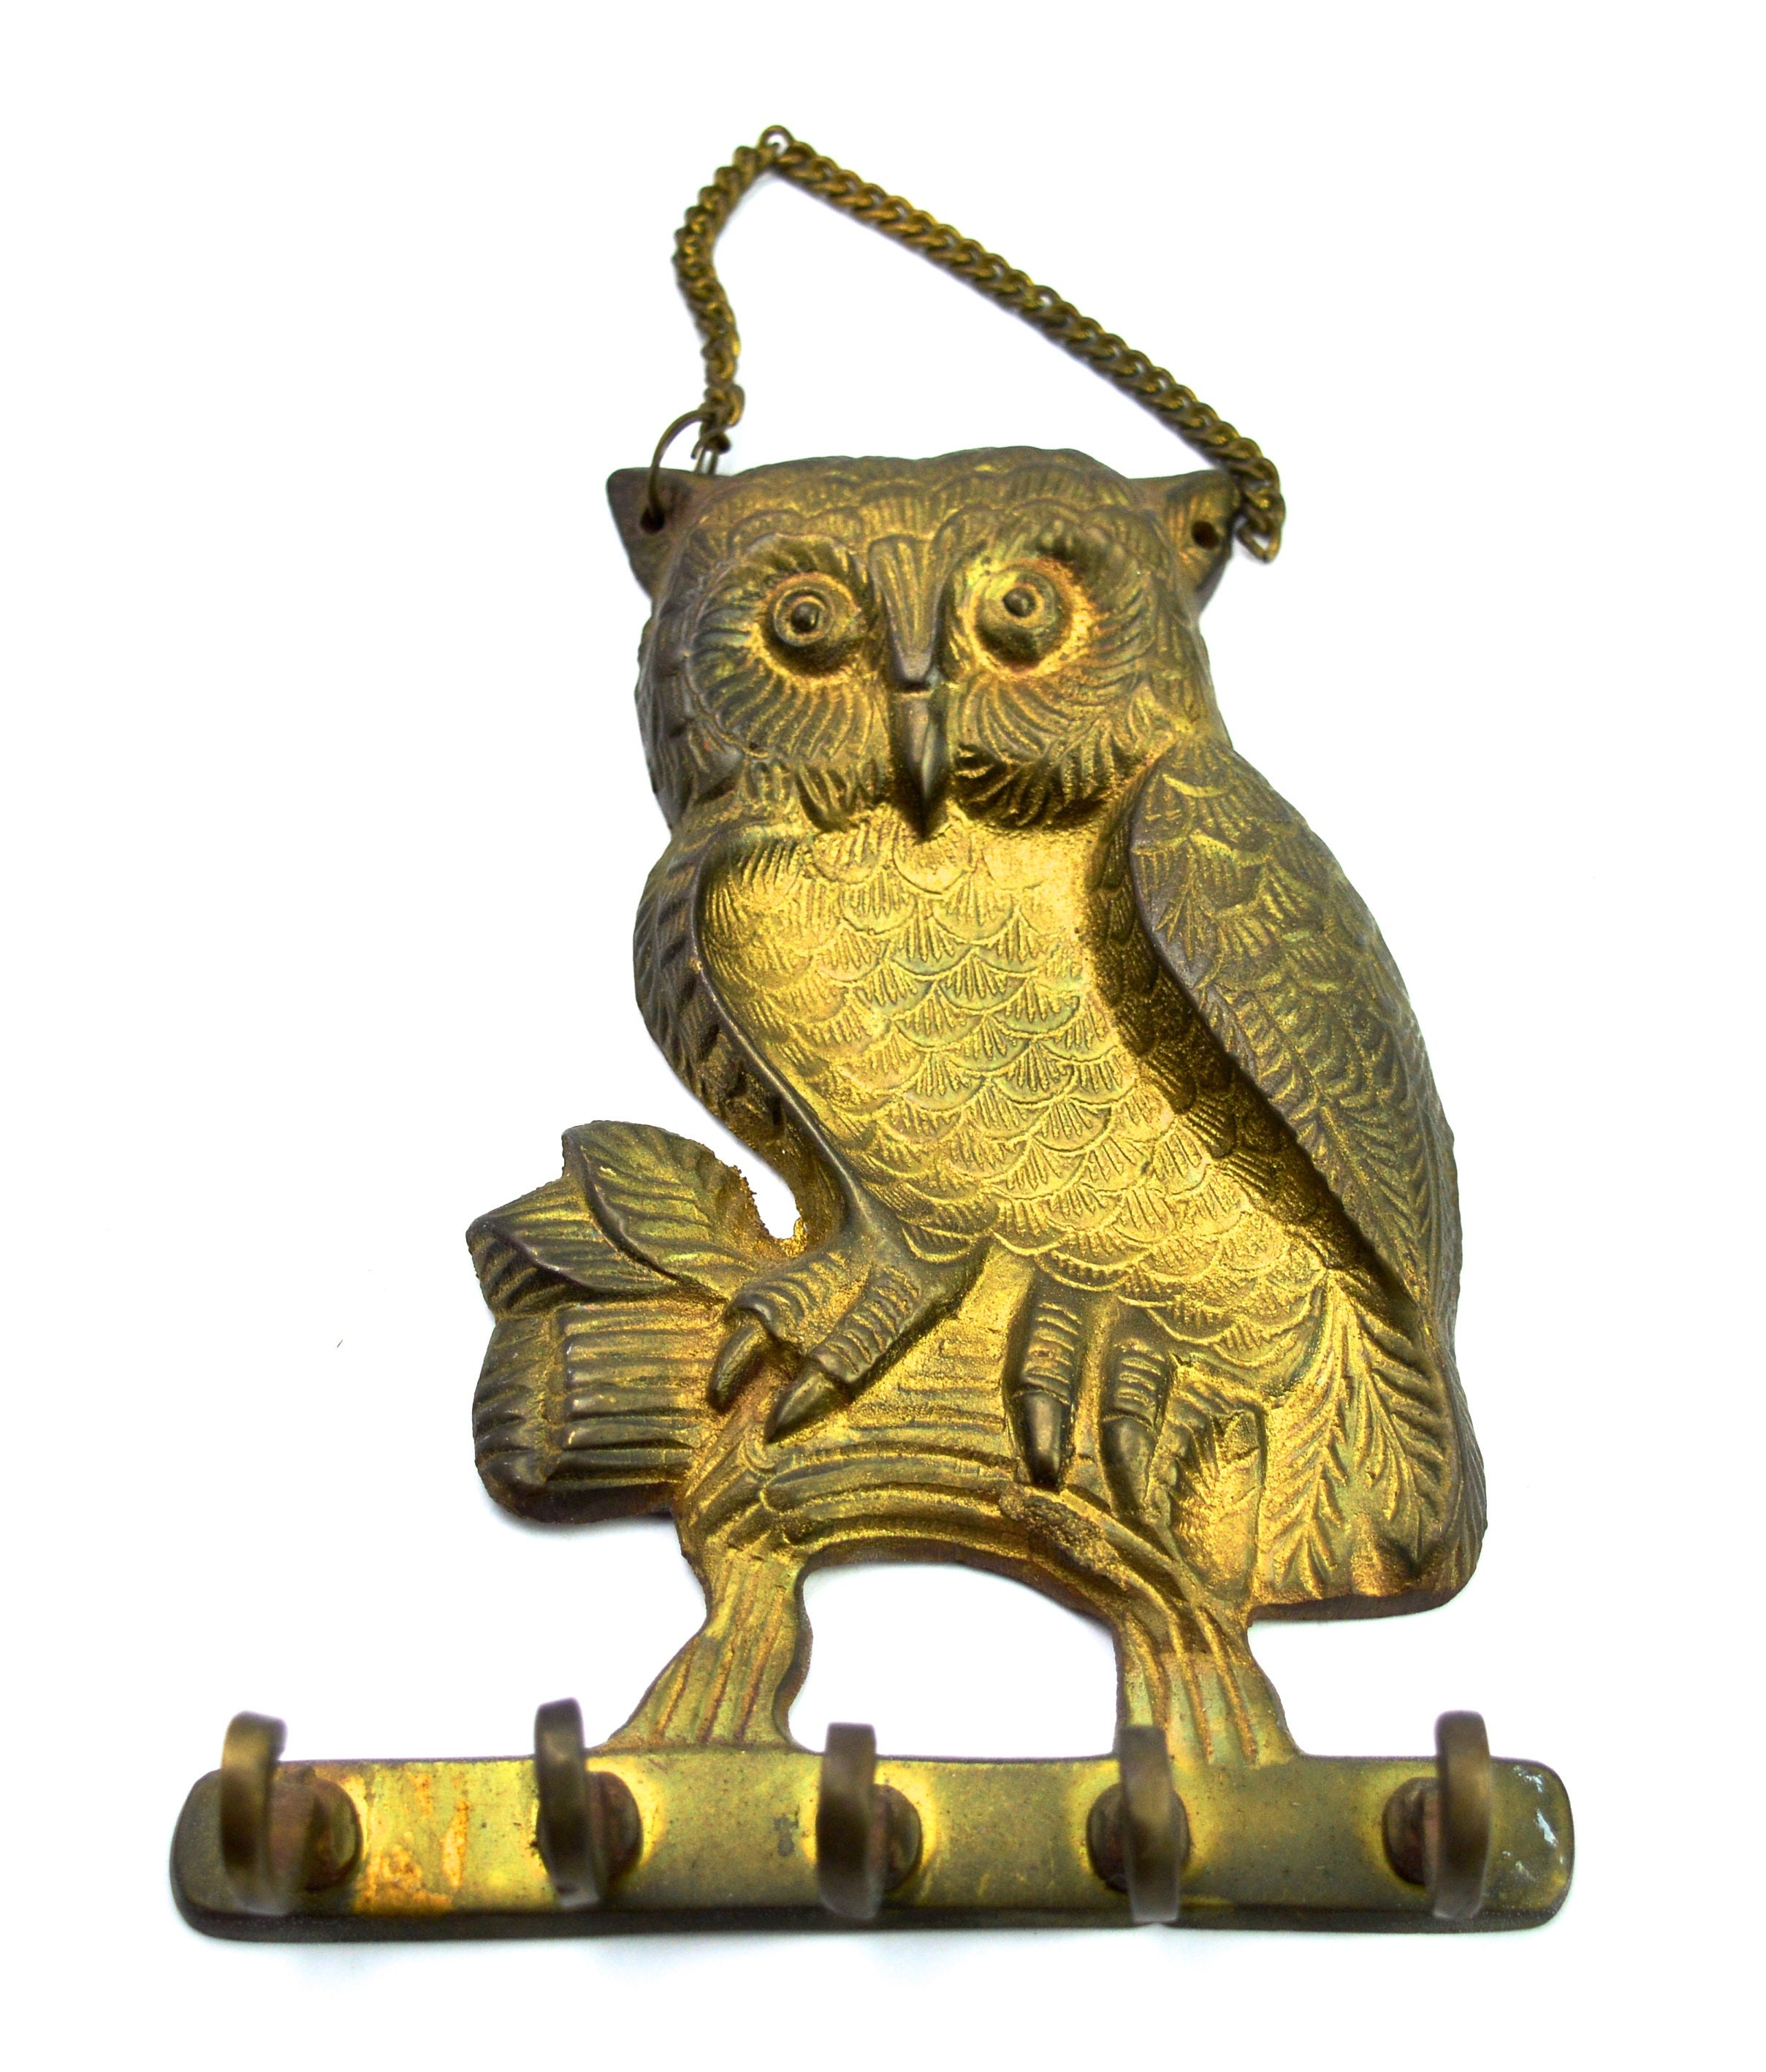 Small 6 inch Owl Widllife Key Rack Hanger with 5 hooks Made in USA 